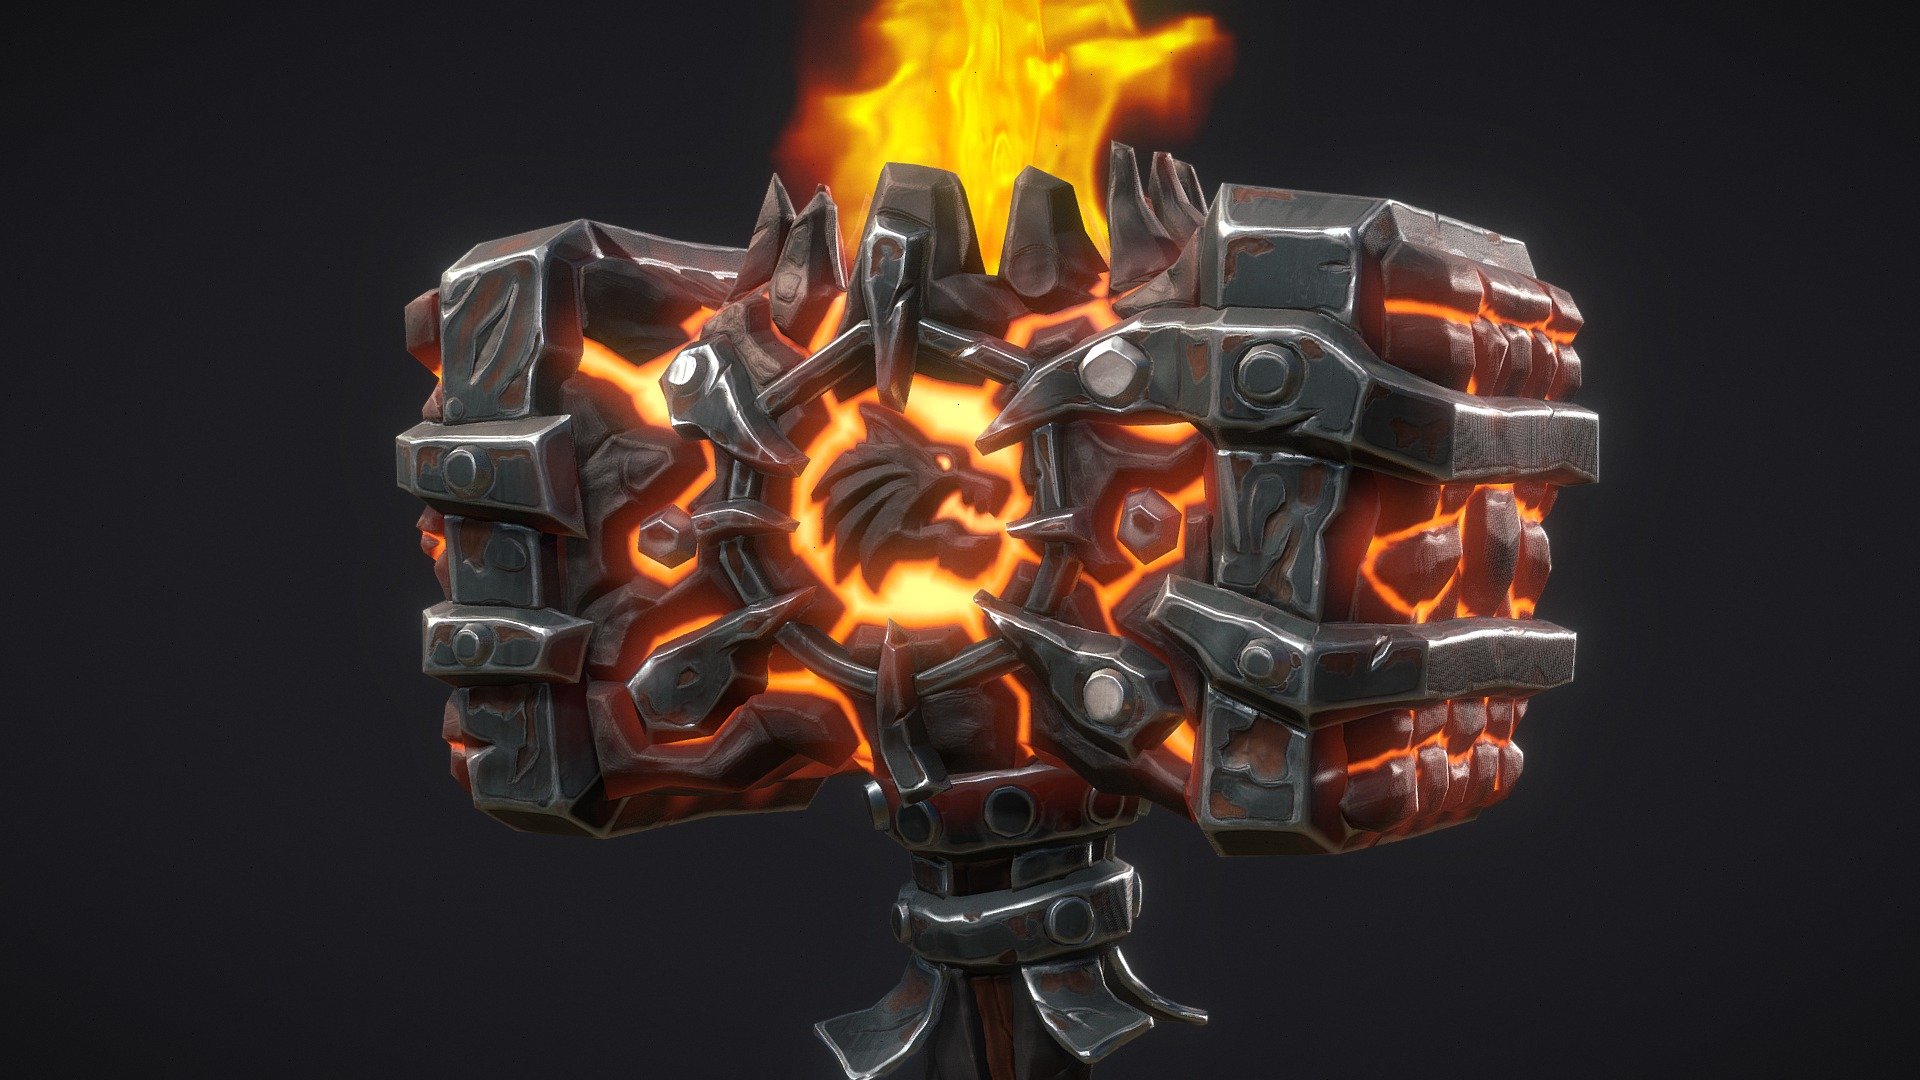 I decided to practice my stylizing skills and made a Doomhammer Artifact weapon of World of Warcraft: Legion. Specifically, Blackhand's Fate skin. You can find this work with more details on my artstation:
https://www.artstation.com/artwork/g0xGyQ

Concept art Christopher Hayes:
https://www.artstation.com/artwork/z0lyL - Doomhammer Blackhand's Fate - 3D model by Grakino 3d model